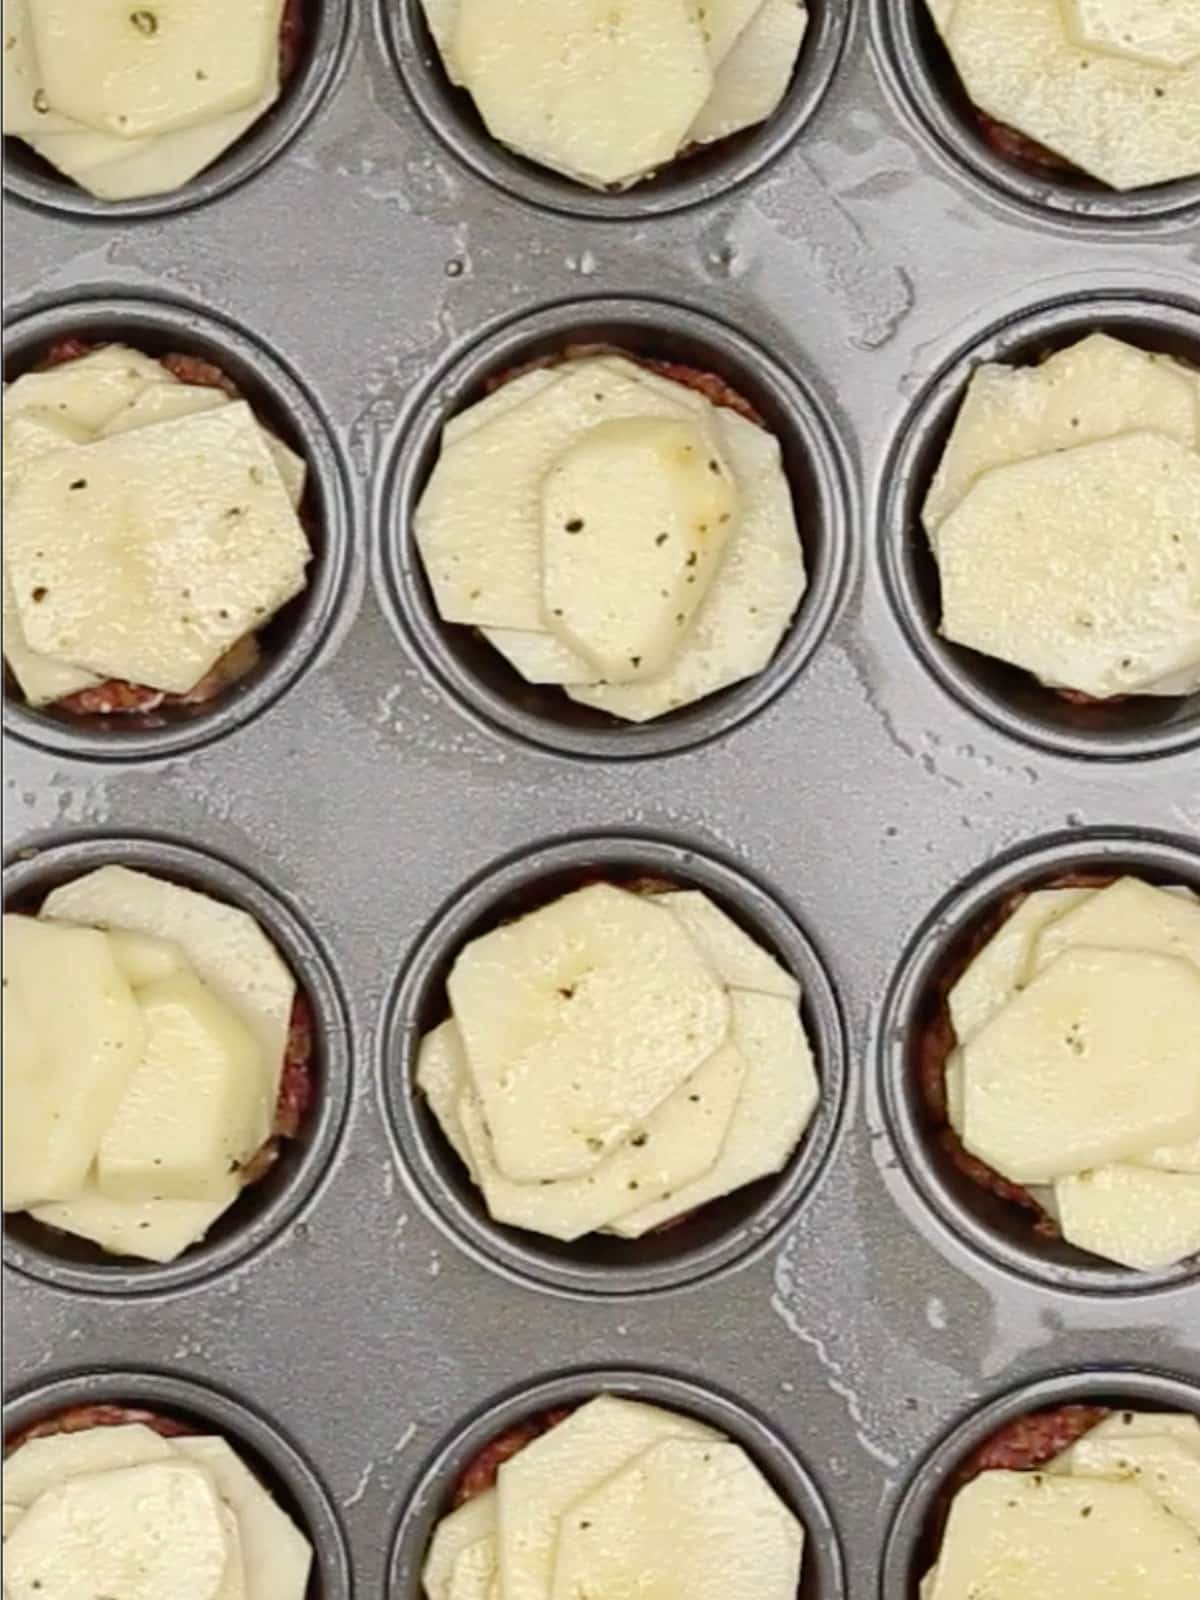 The mini meatloaves topped with seasoned sliced potatoes in a muffin tin.